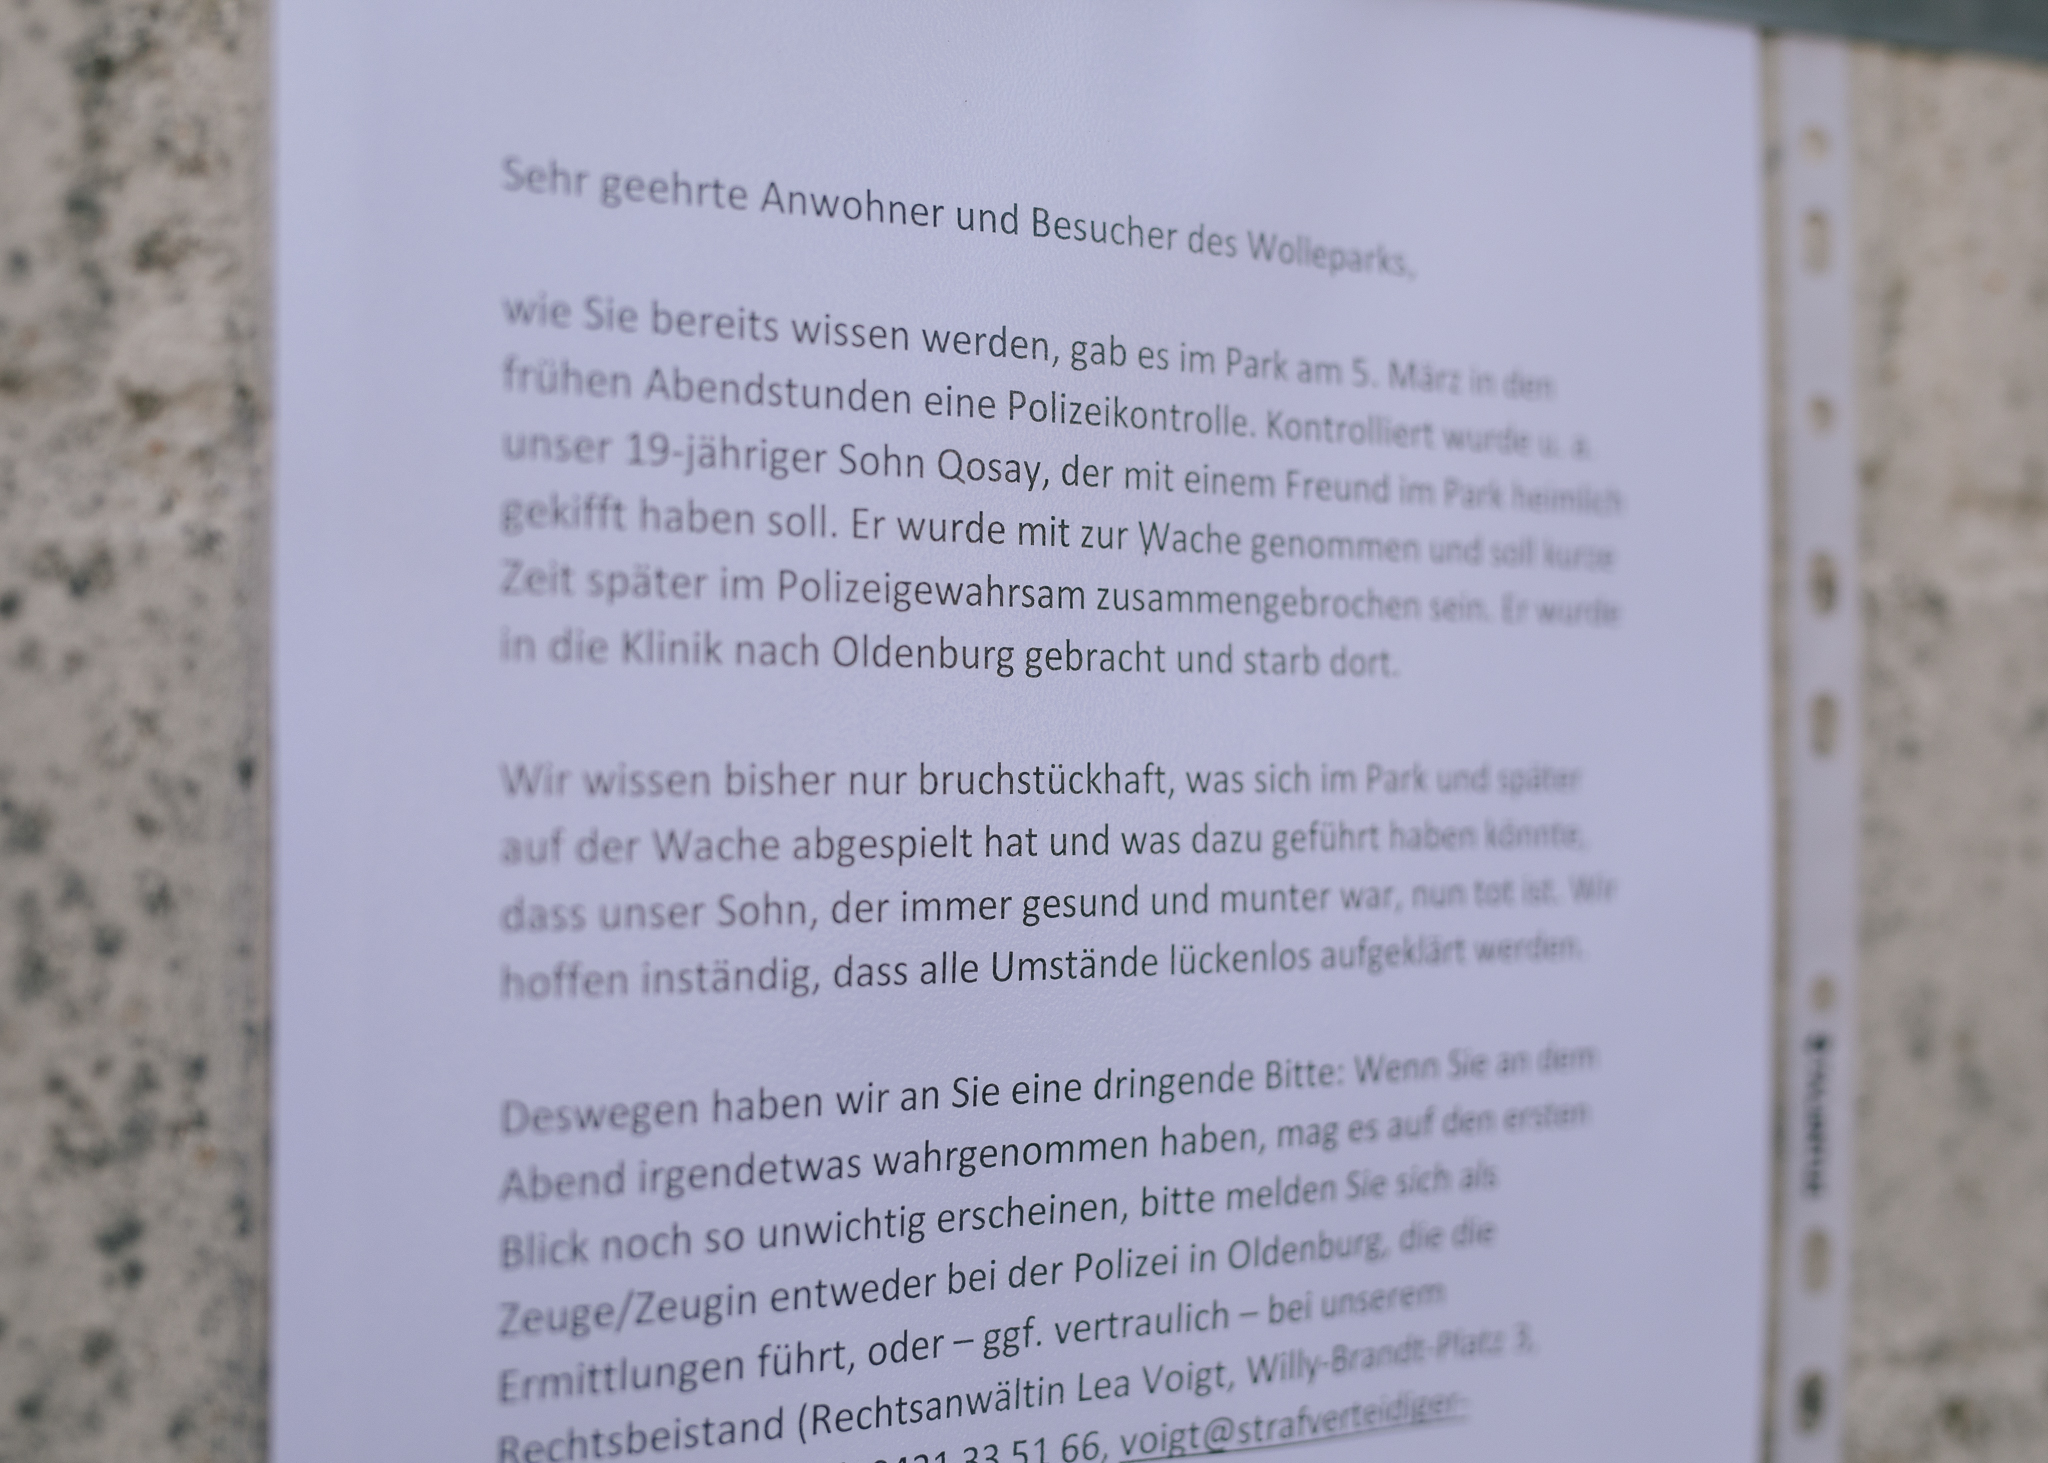 The relatives of Khalaf and their lawyer put up flyers asking people that might have been whitnesses of the situation to contact them or the police. April 17th, 2021, Delmenhorst